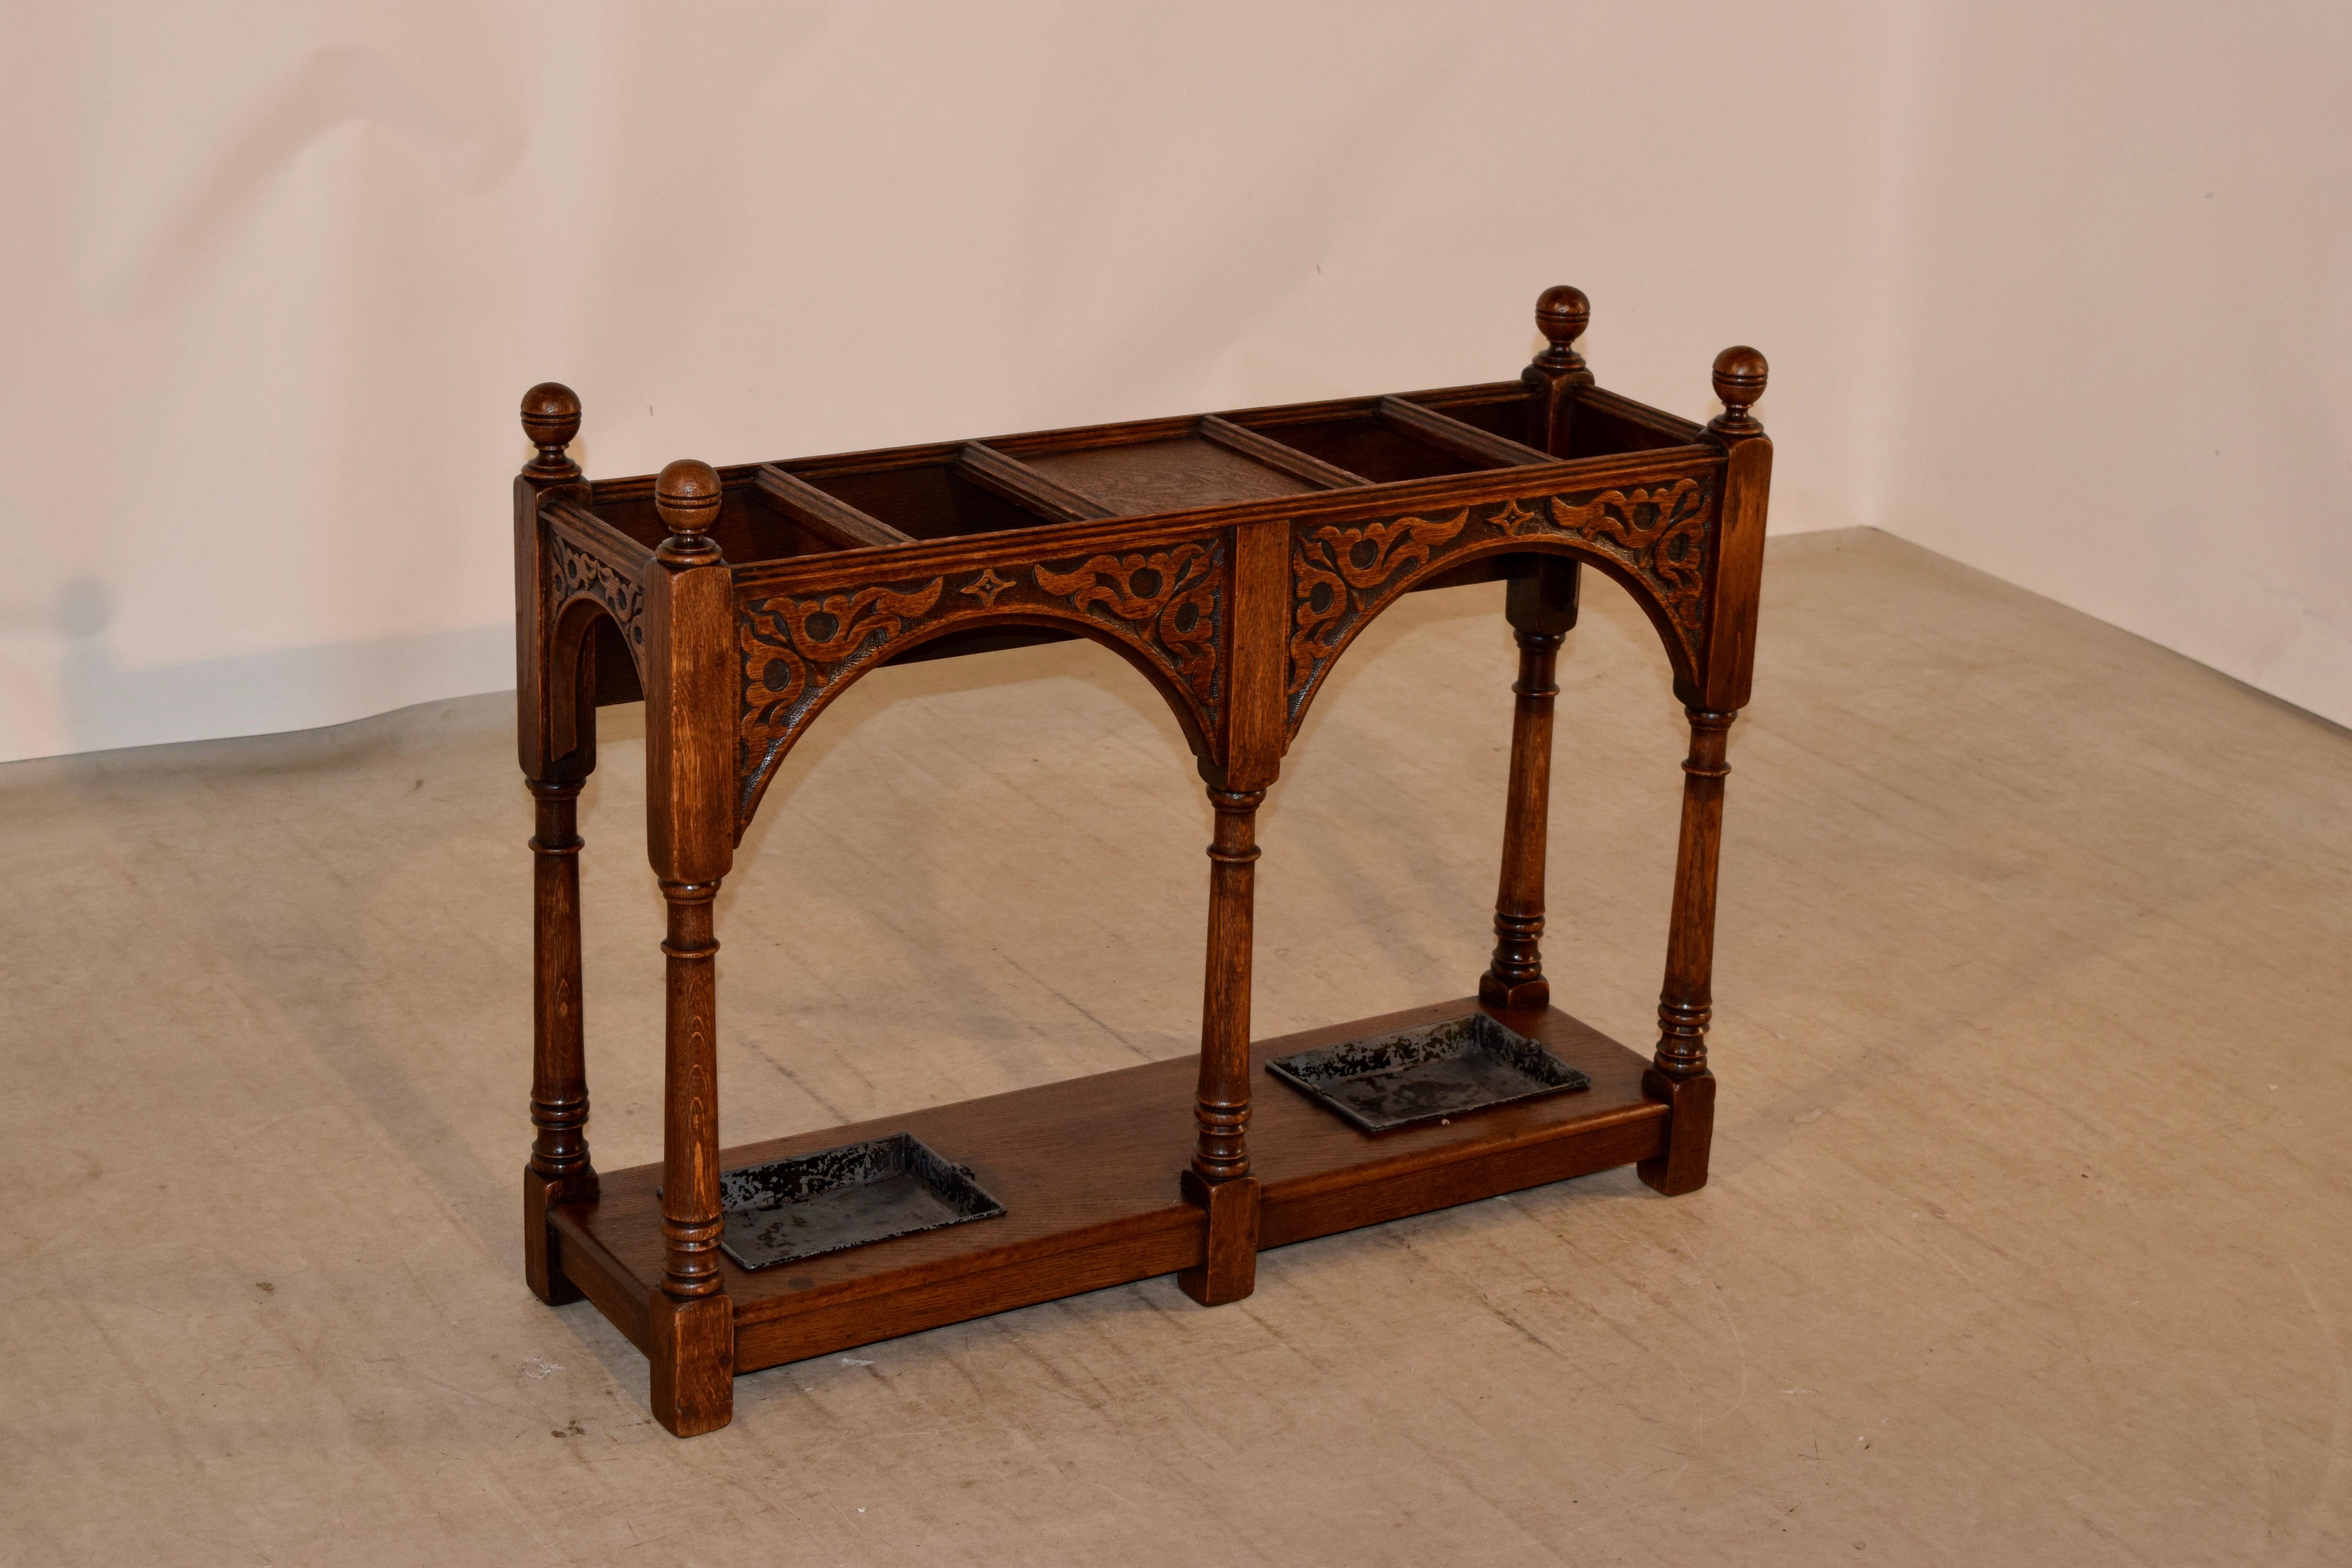 19th century English oak umbrella stand with four sections for umbrellas or canes and two drip trays below. The top has hand-turned finials over a molded edge and shaped aprons with hand carved decoration on three sides. The back side is plain for